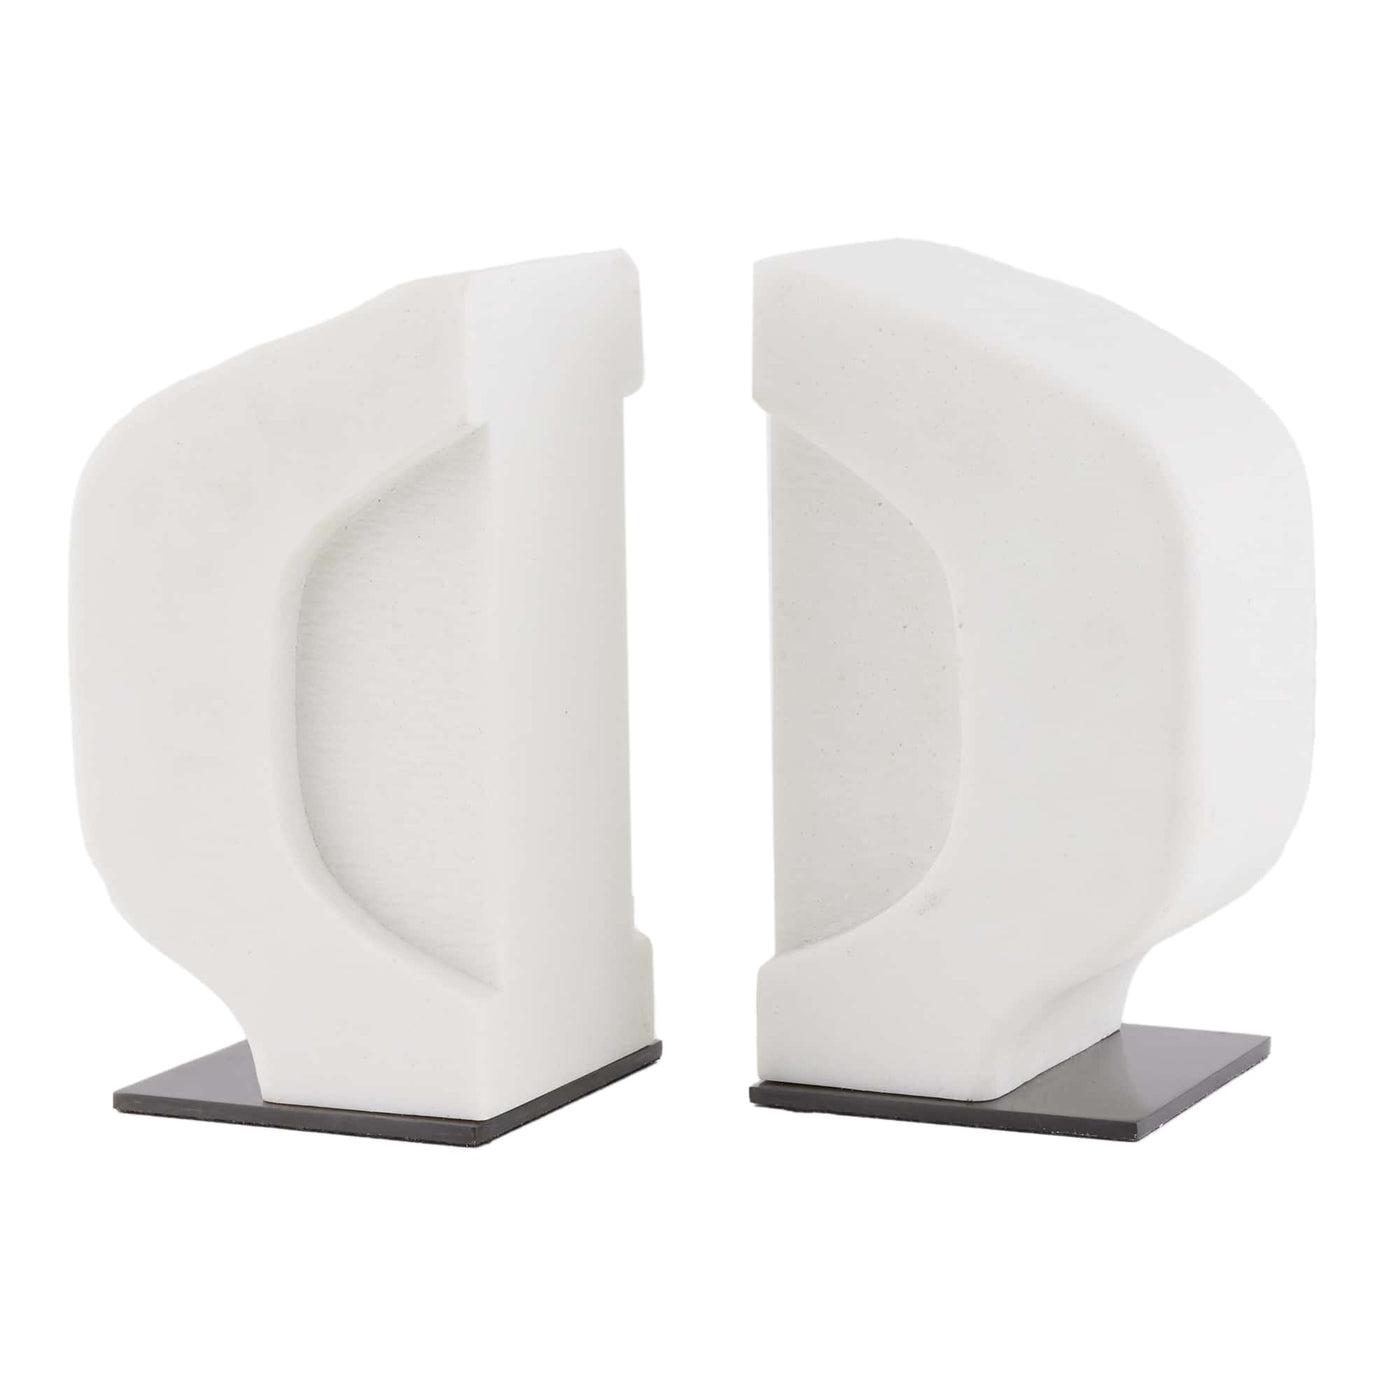 BOOKENDS IVORY RIVERSTONE - SET OF 2